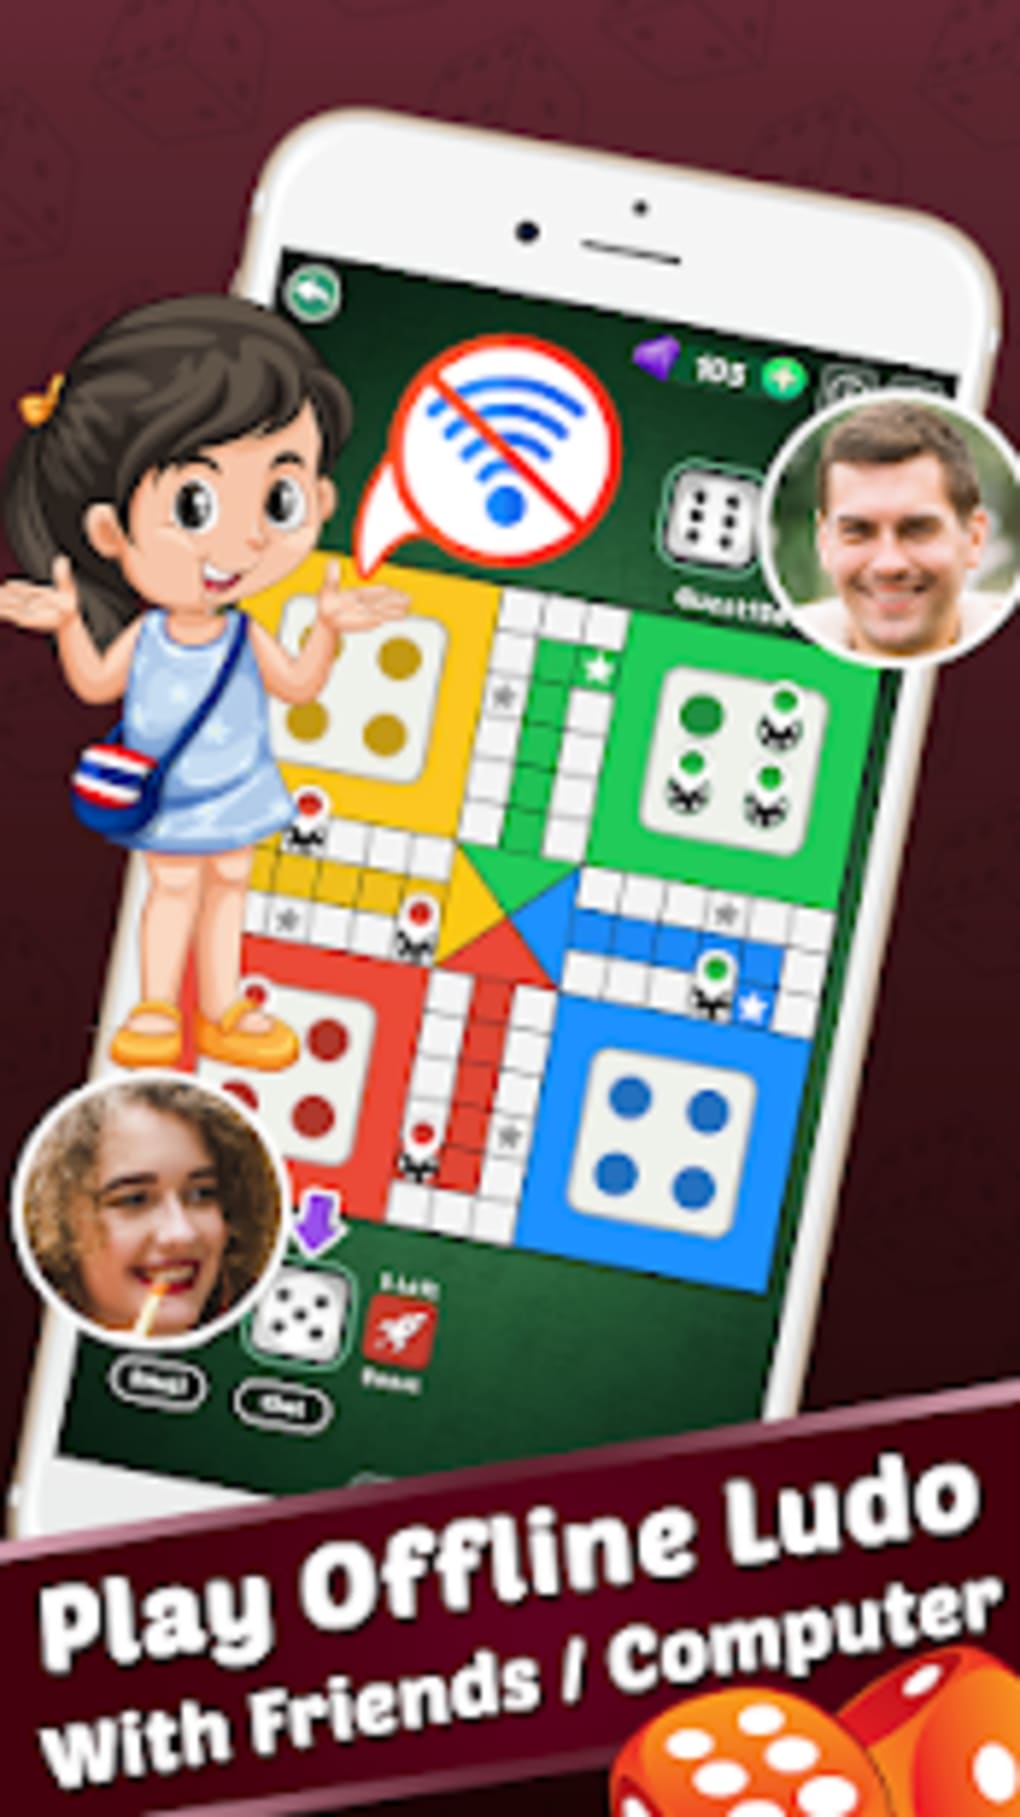 android ludo gameLudo game in 2 players Android play lover as Ludo  Game559 